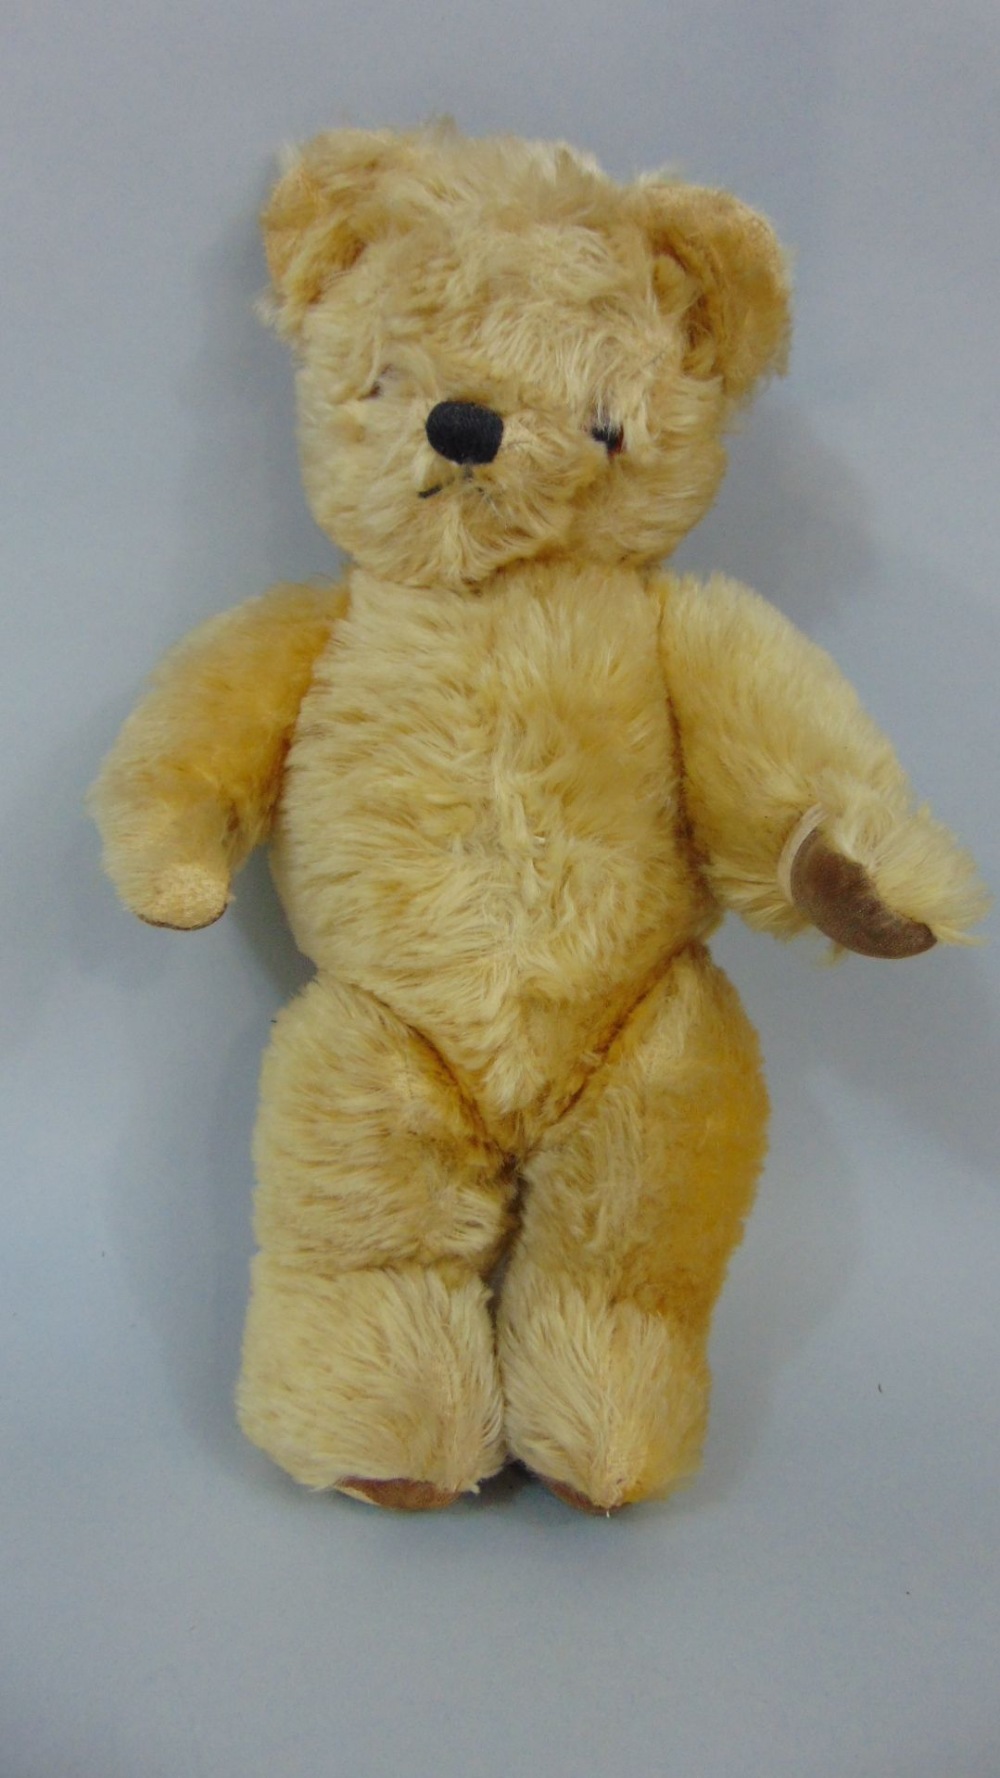 Four vintage teddy bears, all with stitched noses and articulating limbs (one labelled Chad - Image 3 of 4